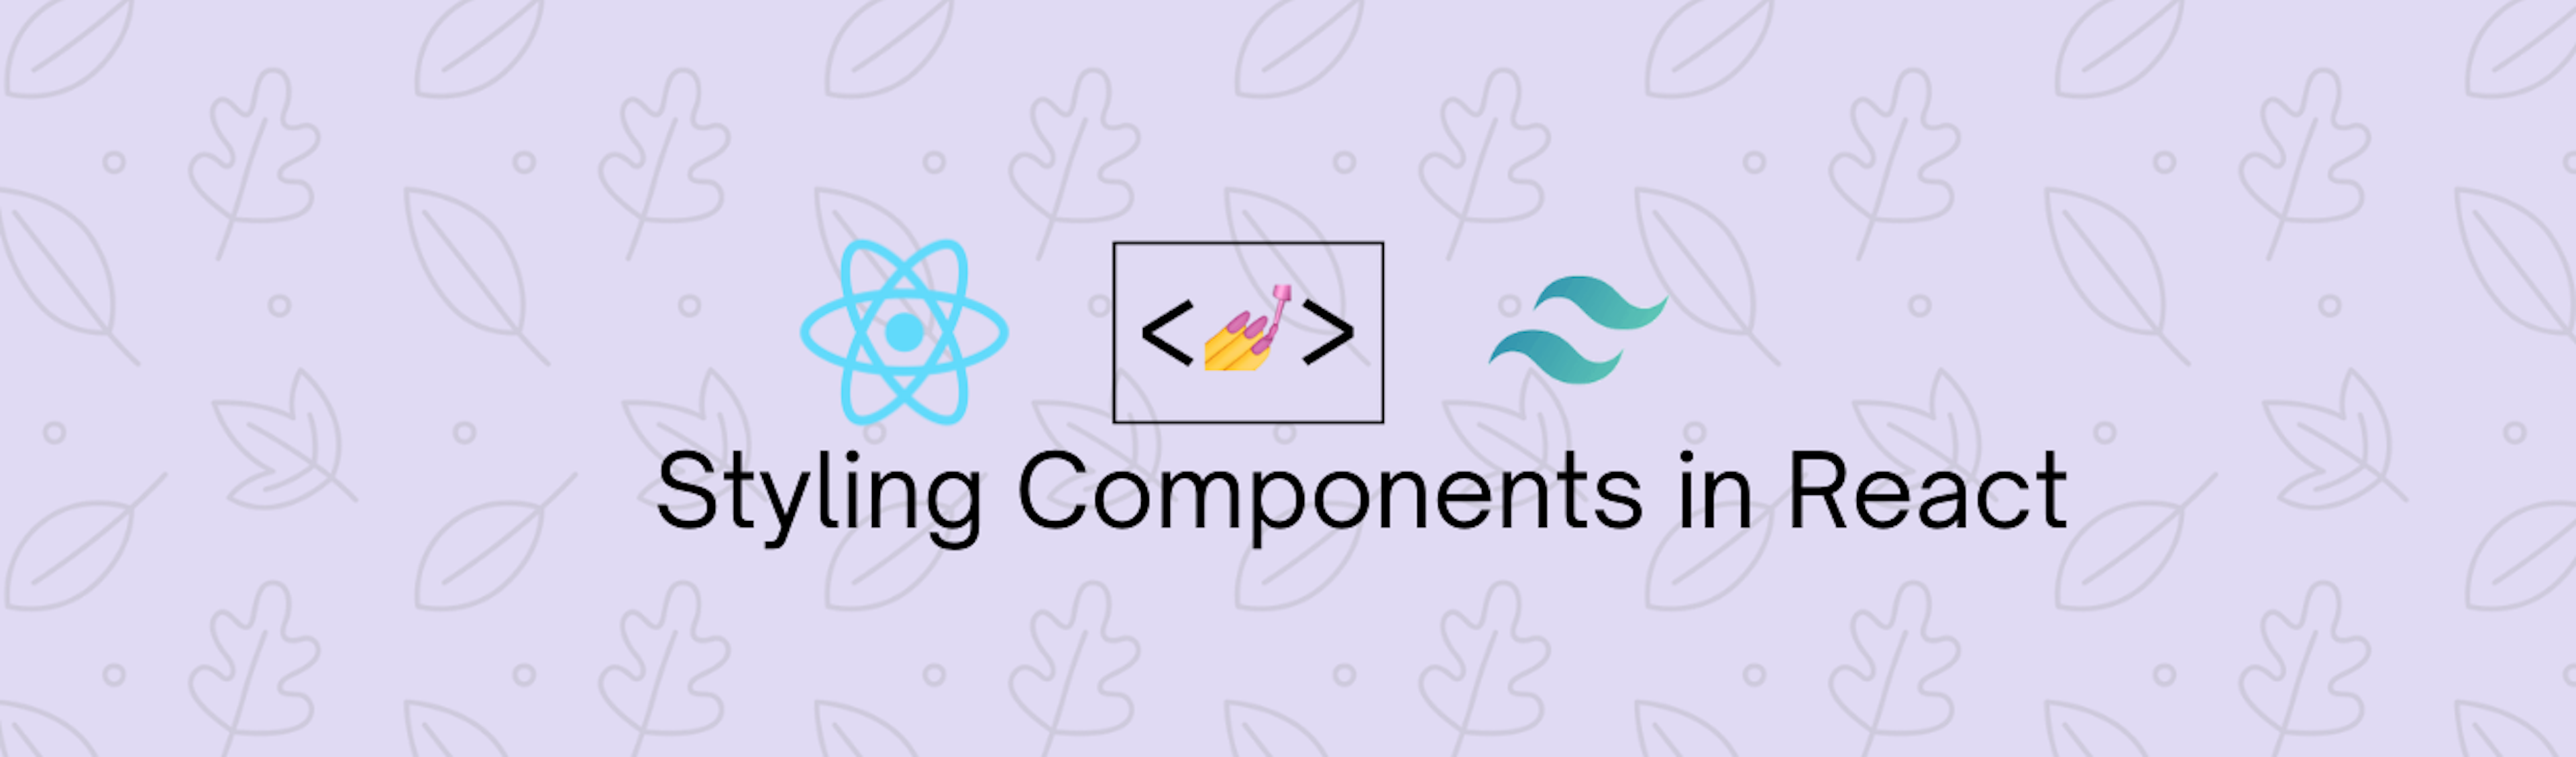 Styling Components In React